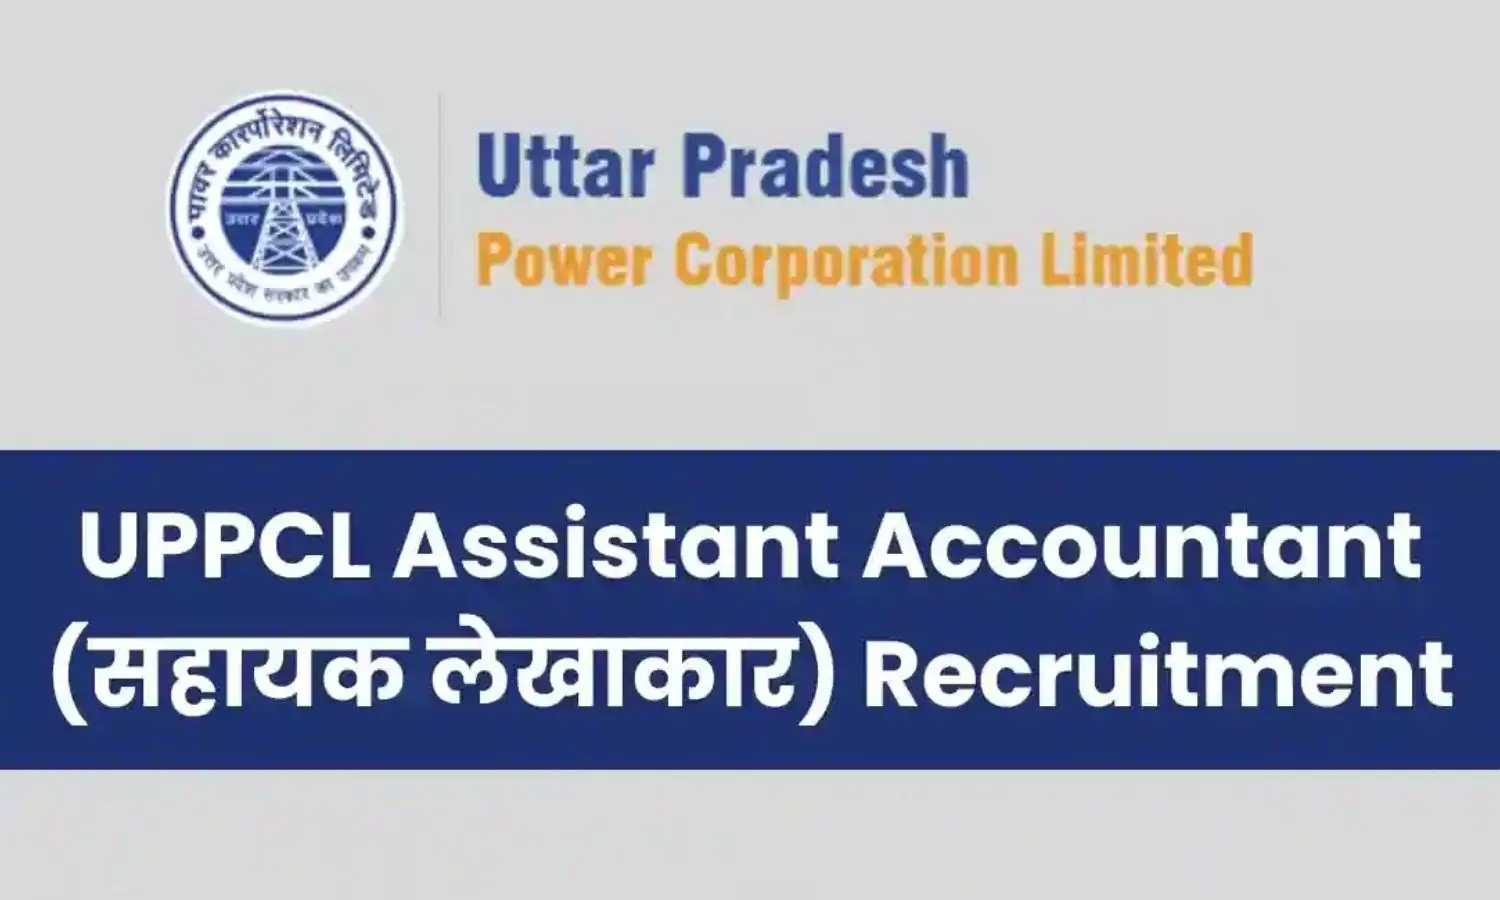 UPPCL Recruitment 2022 issued notification for Assistant Accountant post